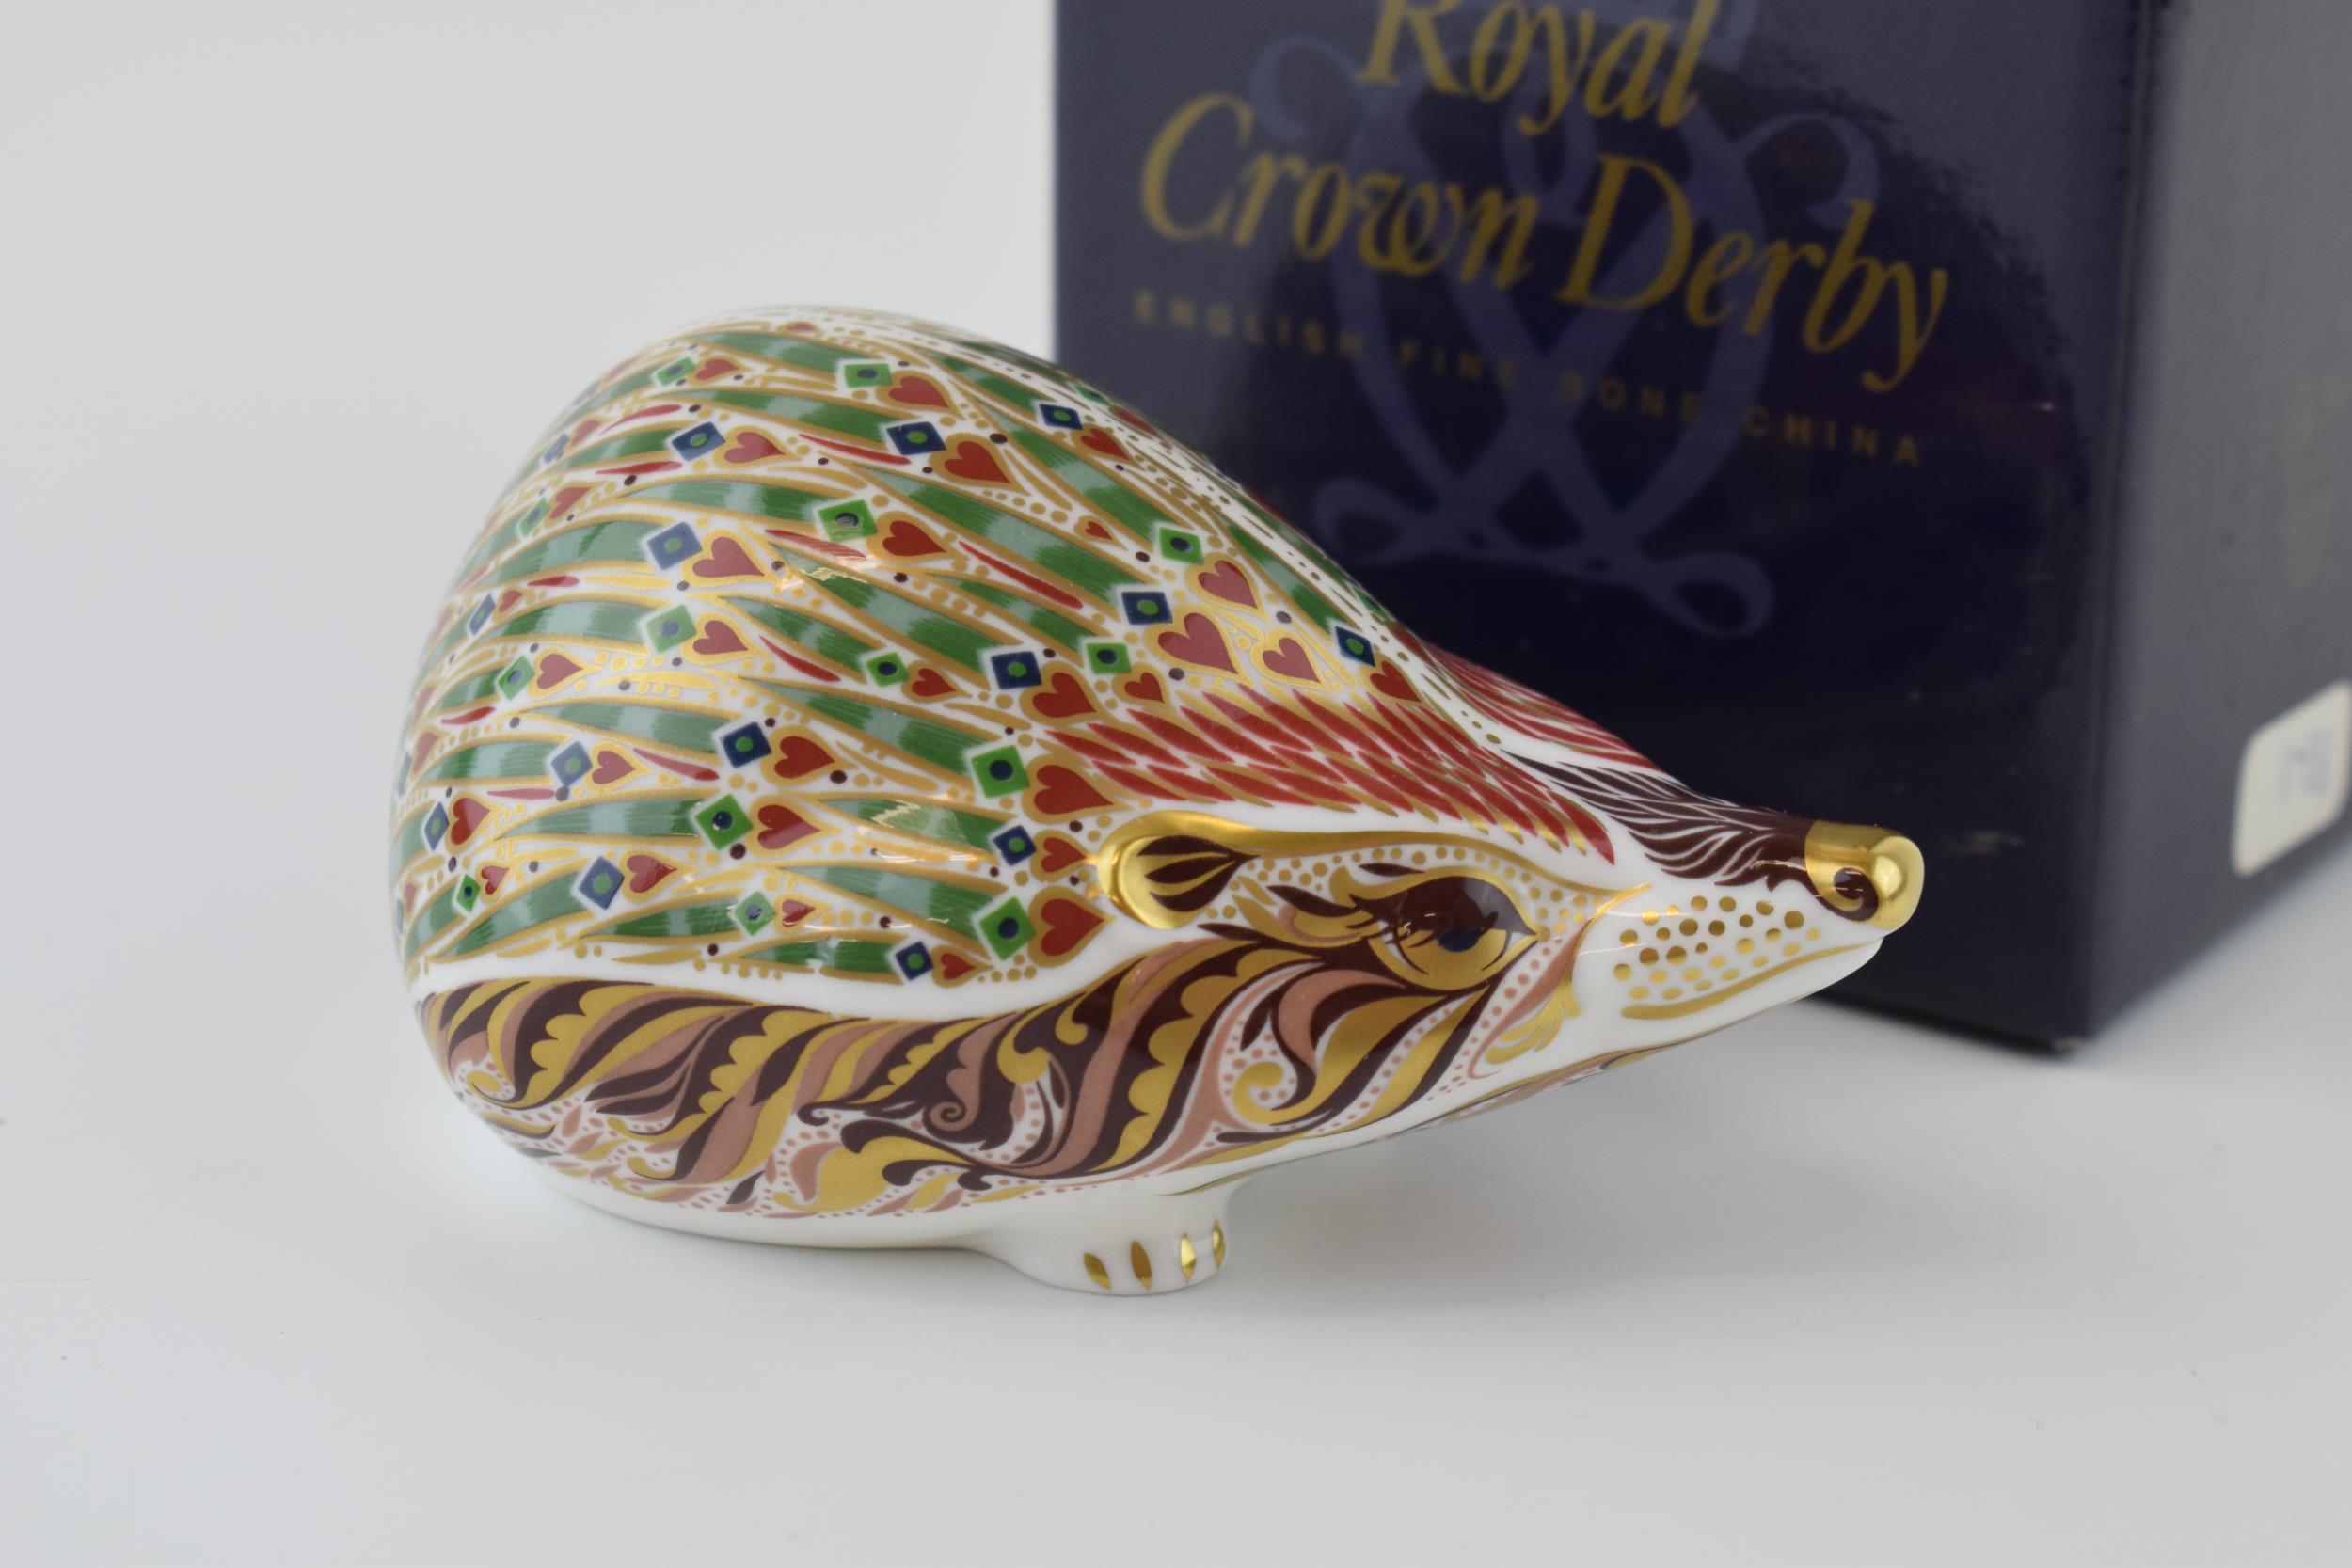 Boxed Royal Crown Derby paperweight, Ashbourne Hedgehog, produced in 1995, this is number 178 of - Image 2 of 3